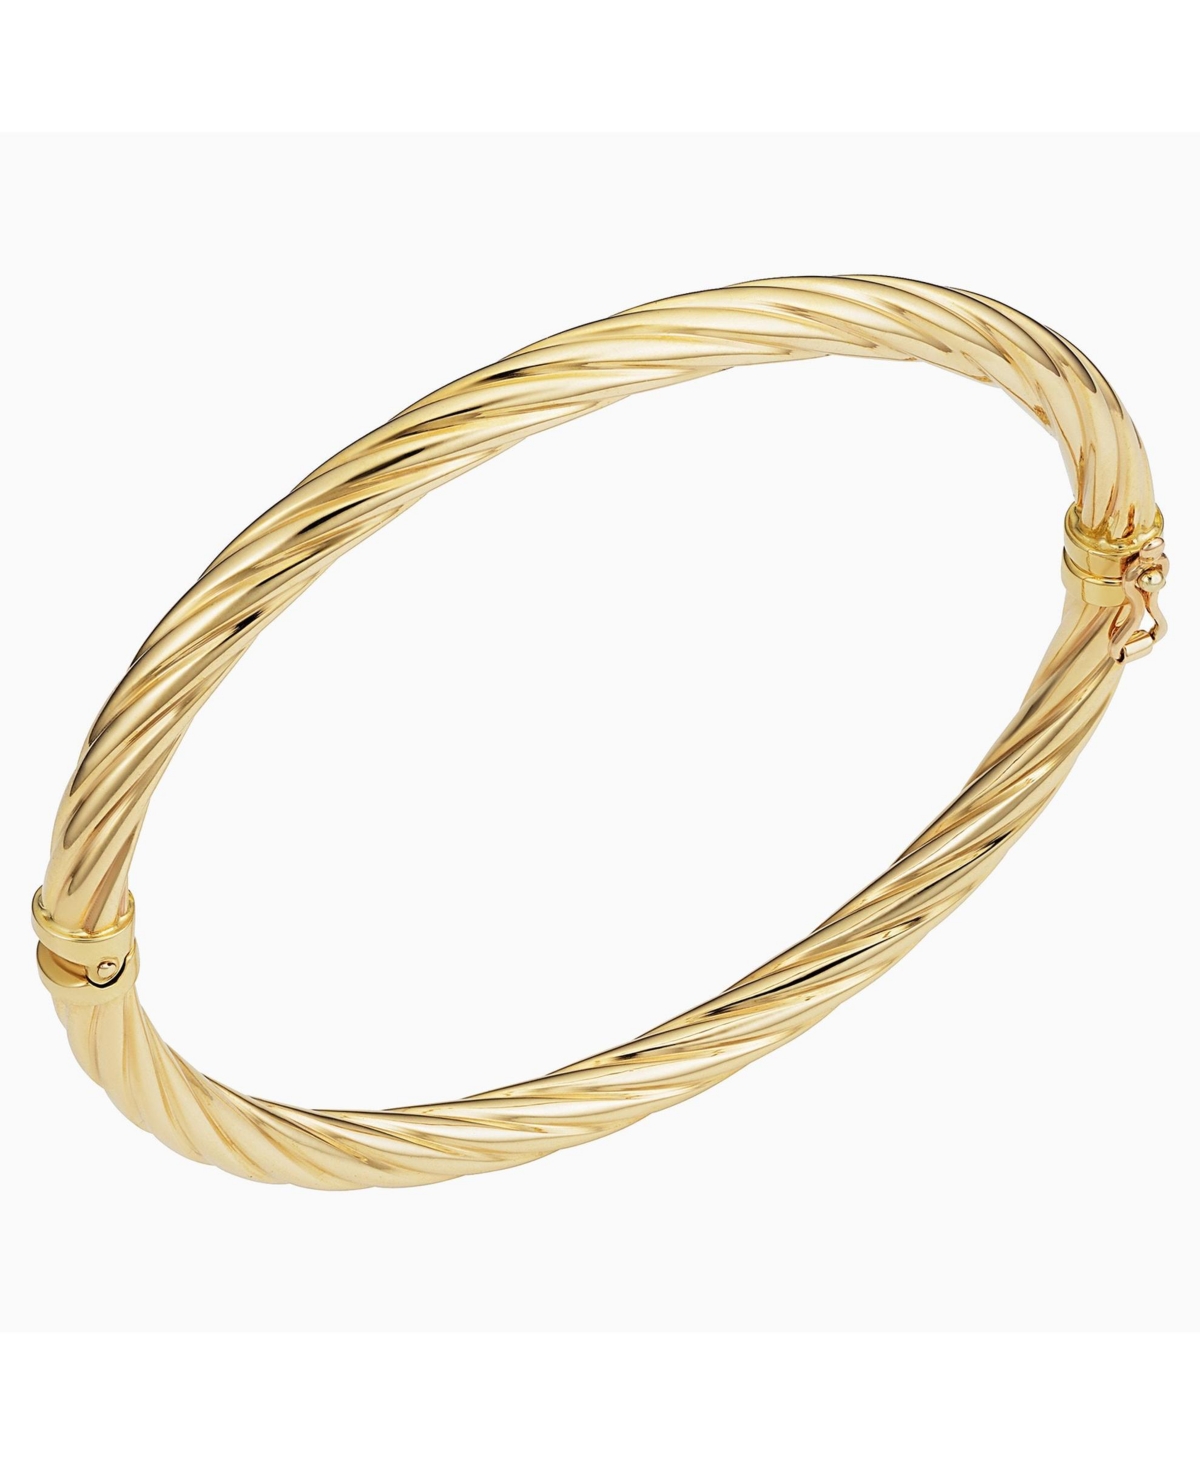 ORADINA WITH A TWIST BANGLE ONE SIZE IN 14K YELLOW GOLD